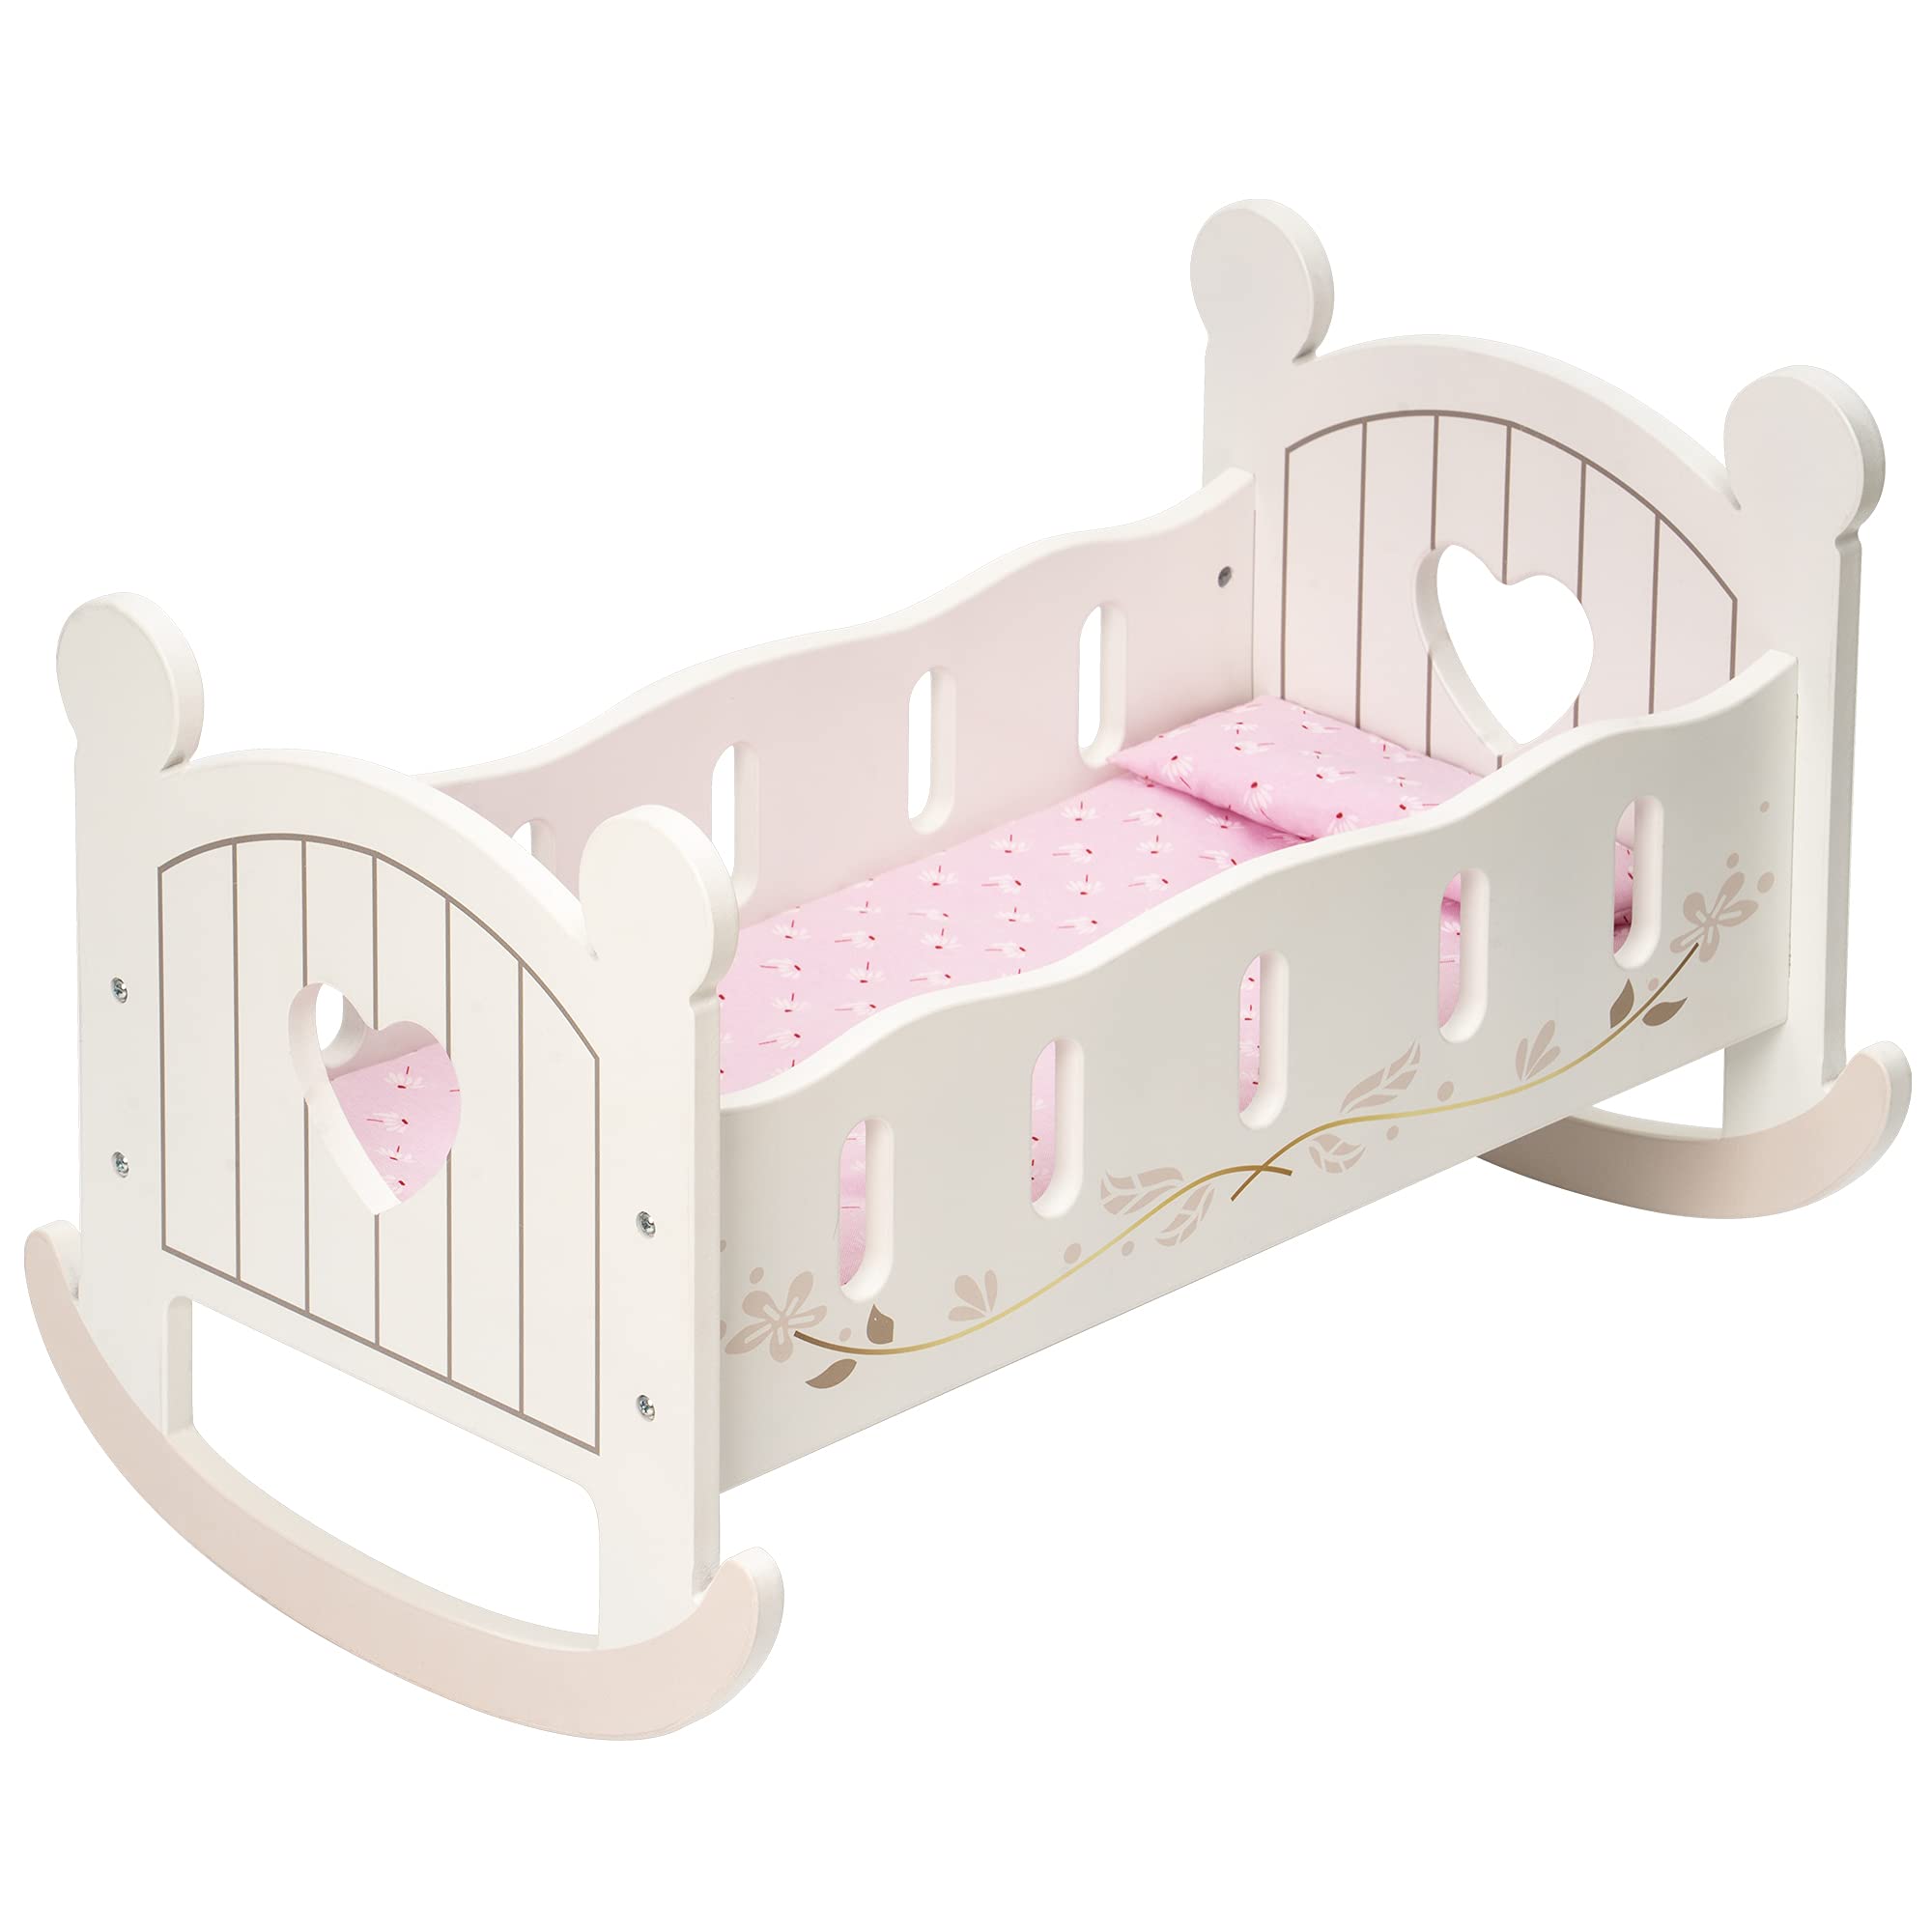 ROBOTIME Wooden Doll Cradle Rocking Baby Doll Crib, Reversible Doll Bed for Dolls Girl,Fits Dolls up to 18 Inches (White)